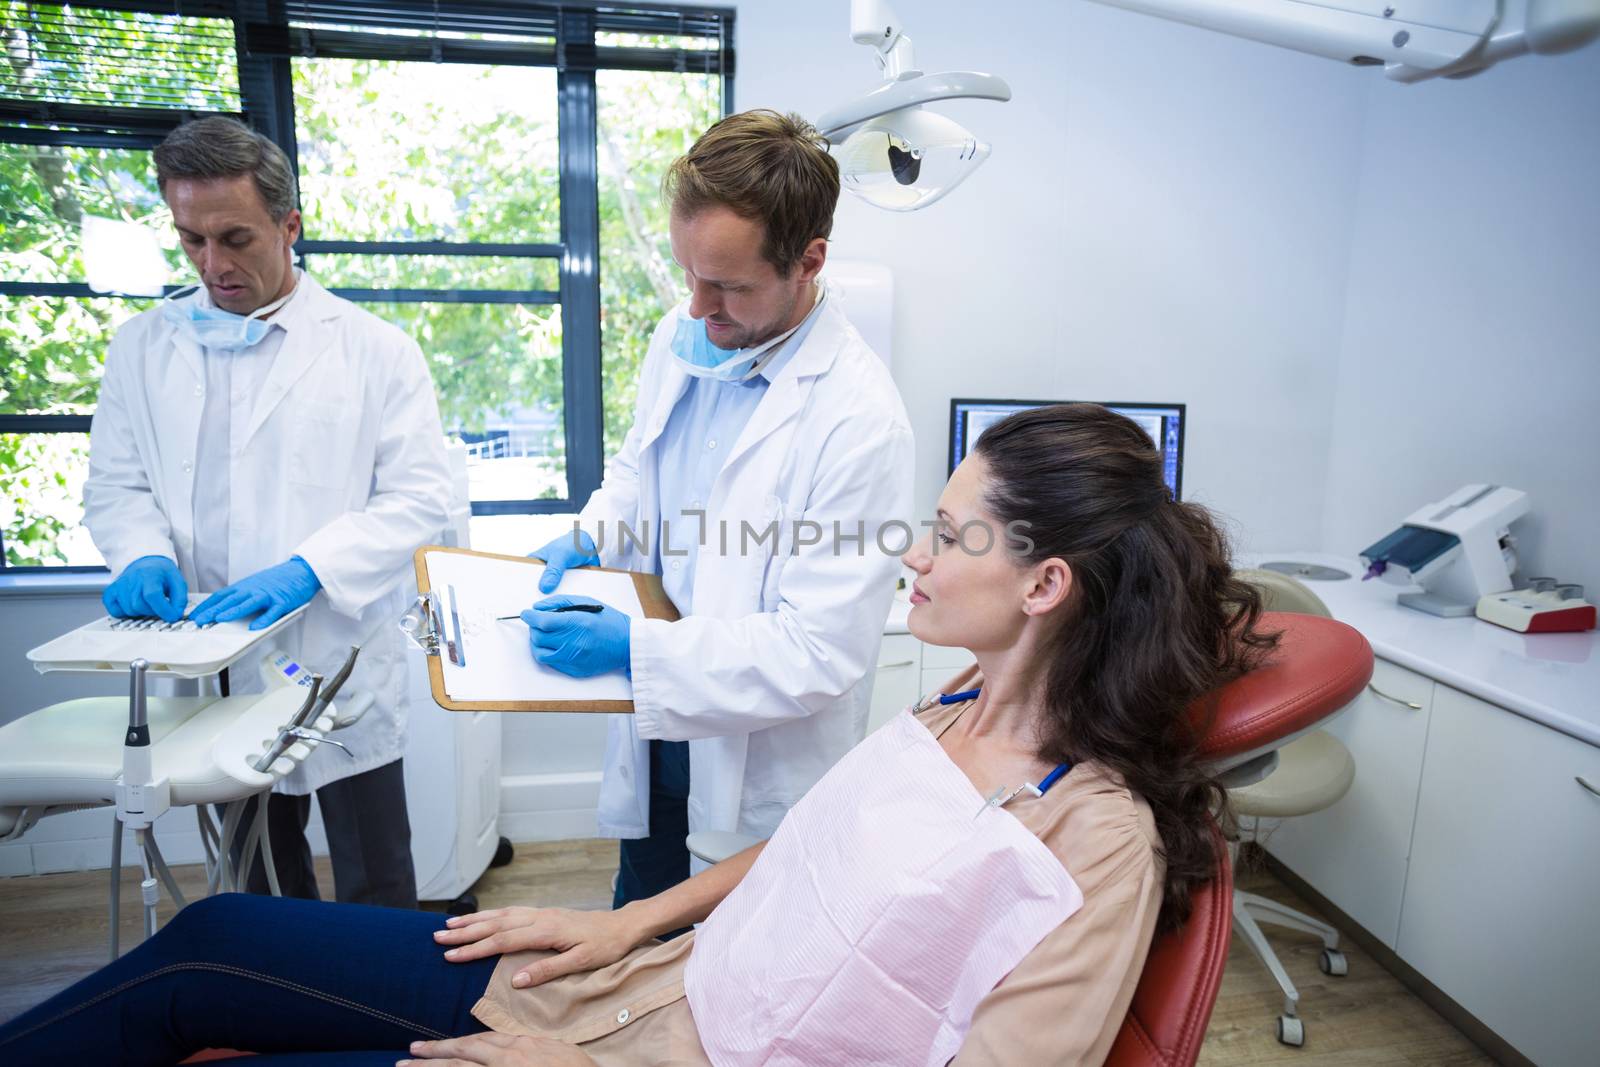 Dentist interacting with female patient by Wavebreakmedia